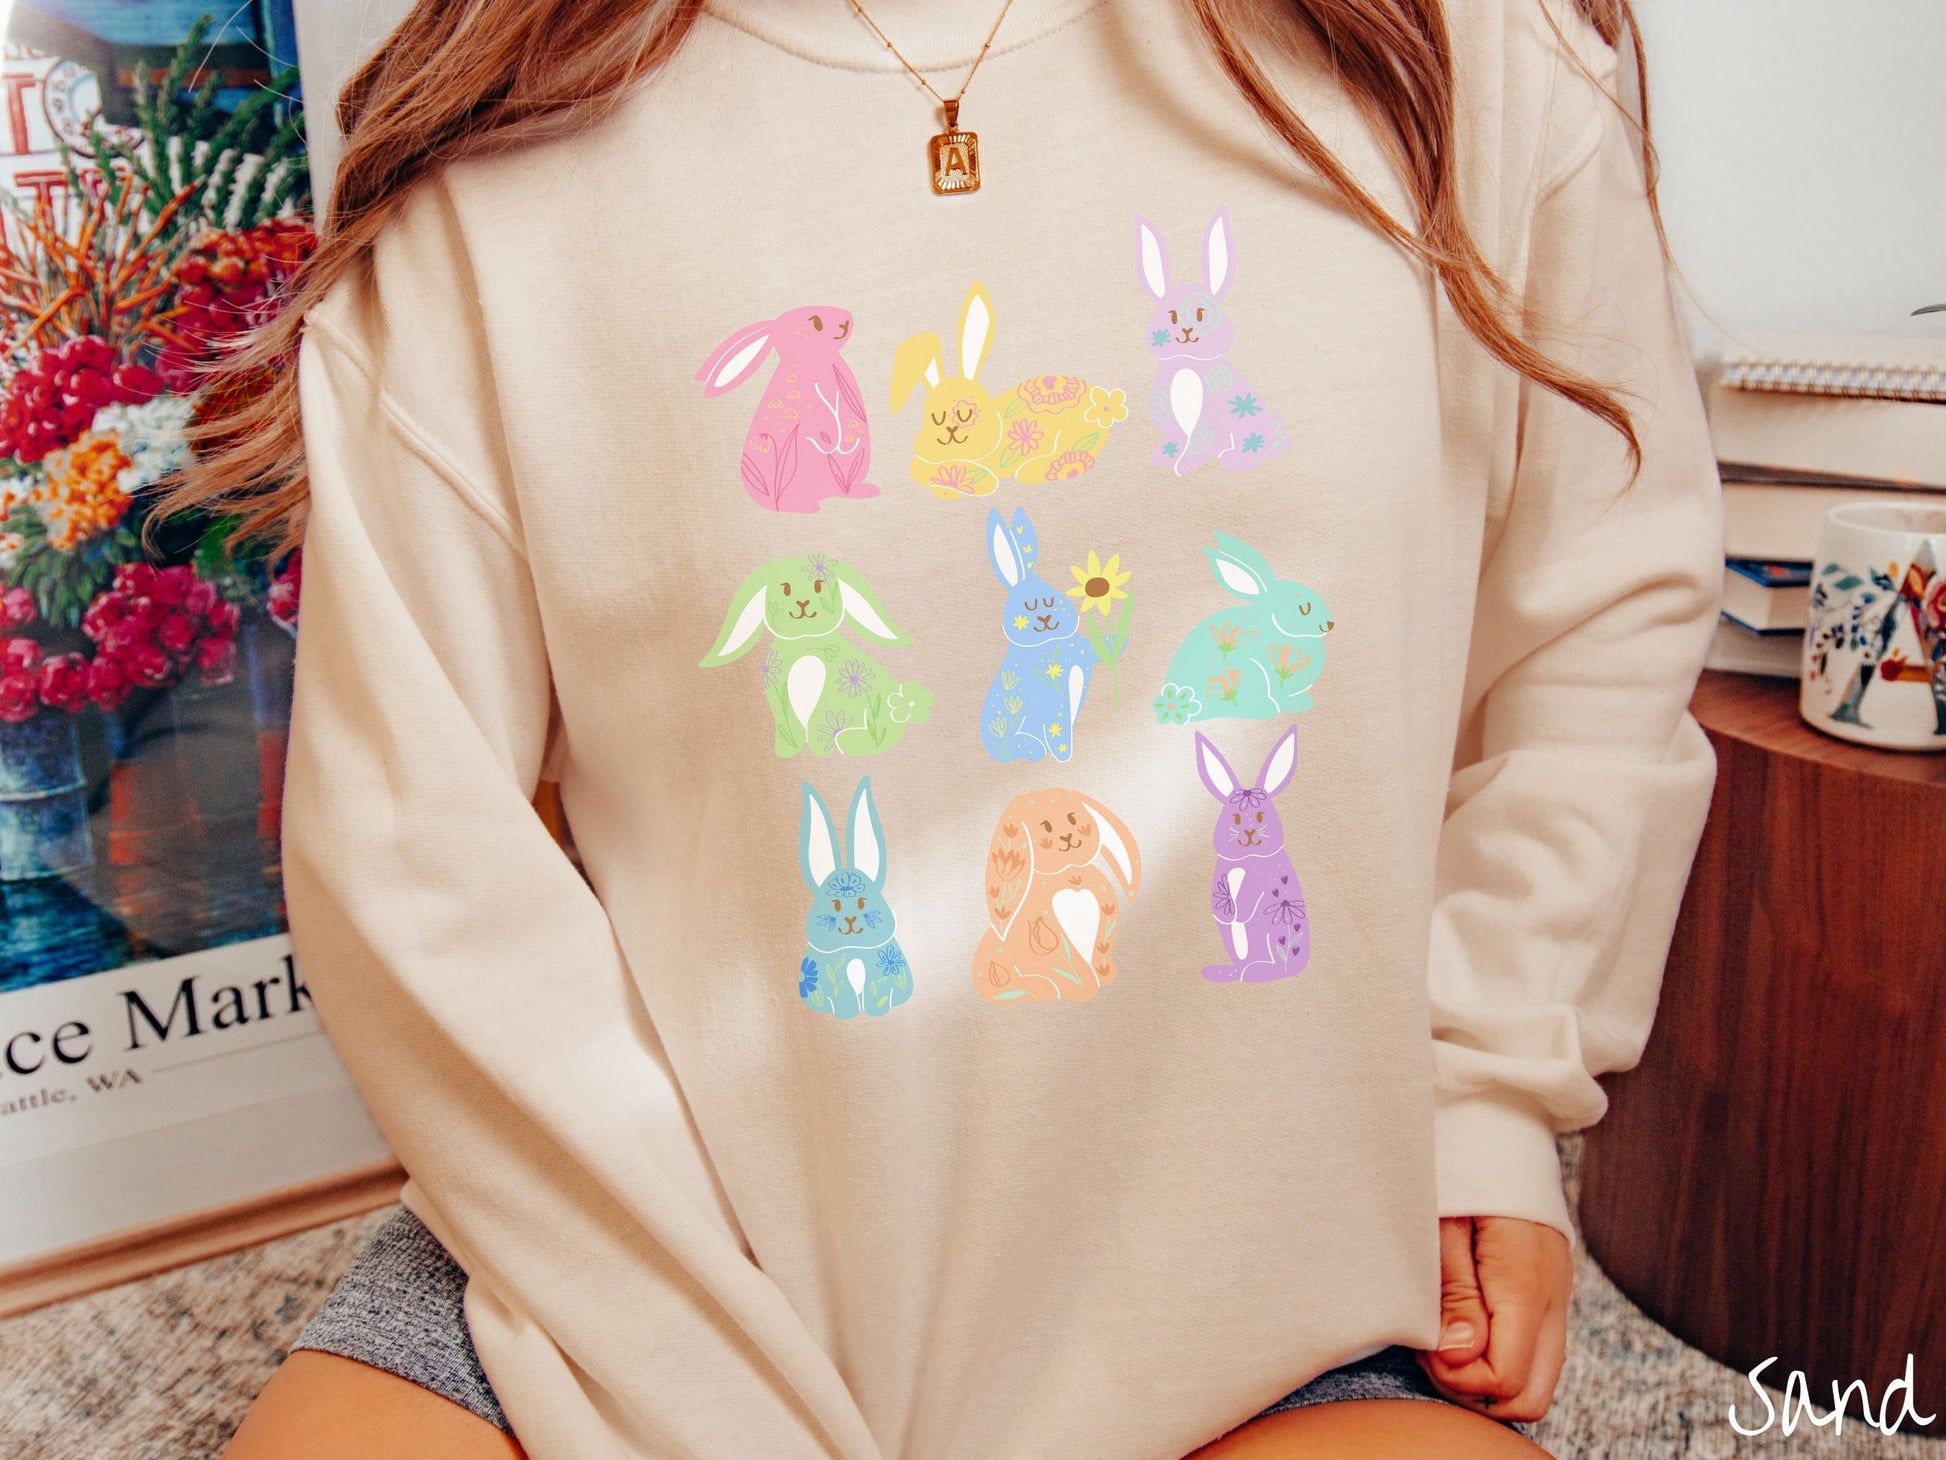 A woman wearing a cute, vintage sand colored sweatshirt with a three by three grid of colorful bunny rabbits. They are from left to right pink, yellow, purple, green, blue, seafoam, light blue, orange, and purple with flowers near them.